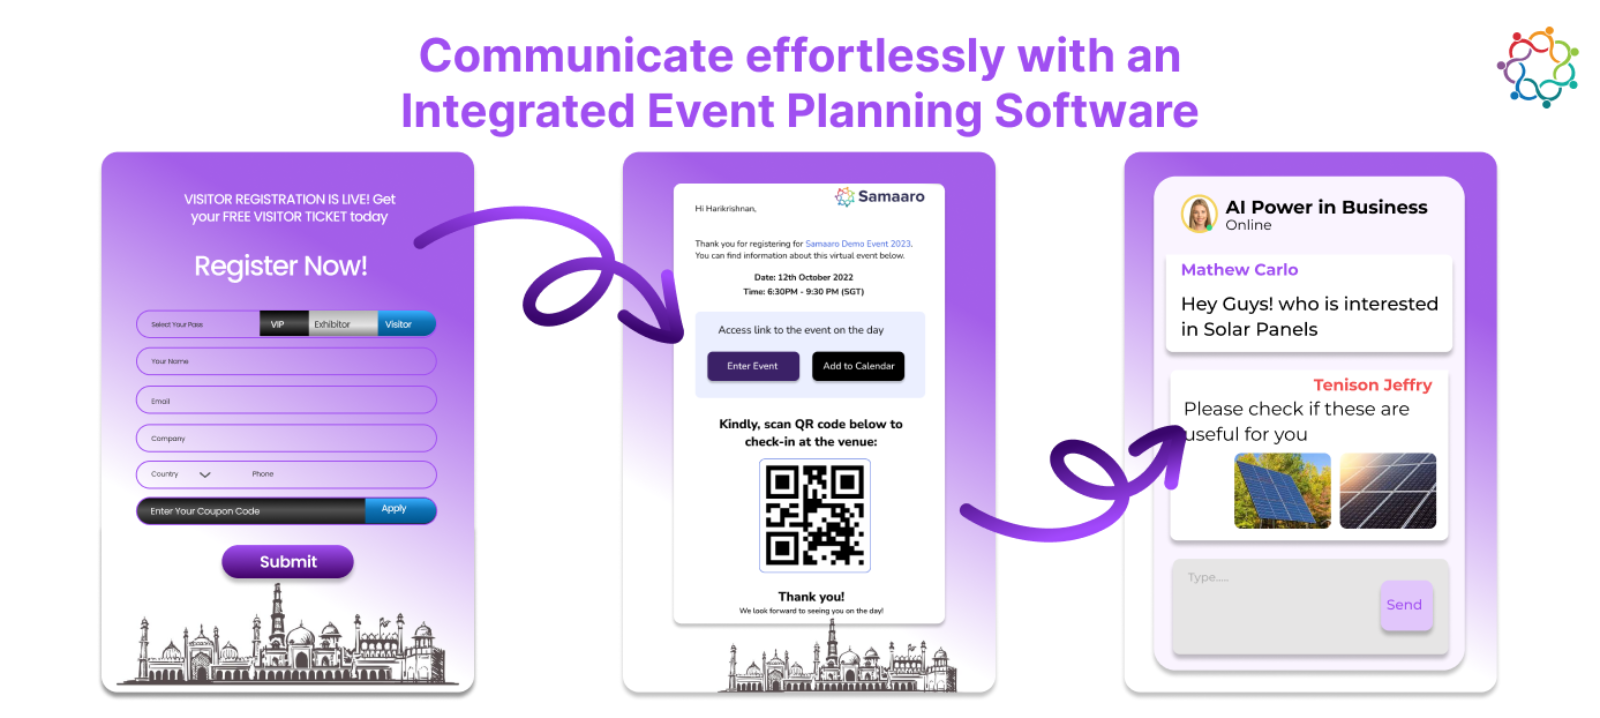 Effortless Event Communication with an Integrated Event Planning Software